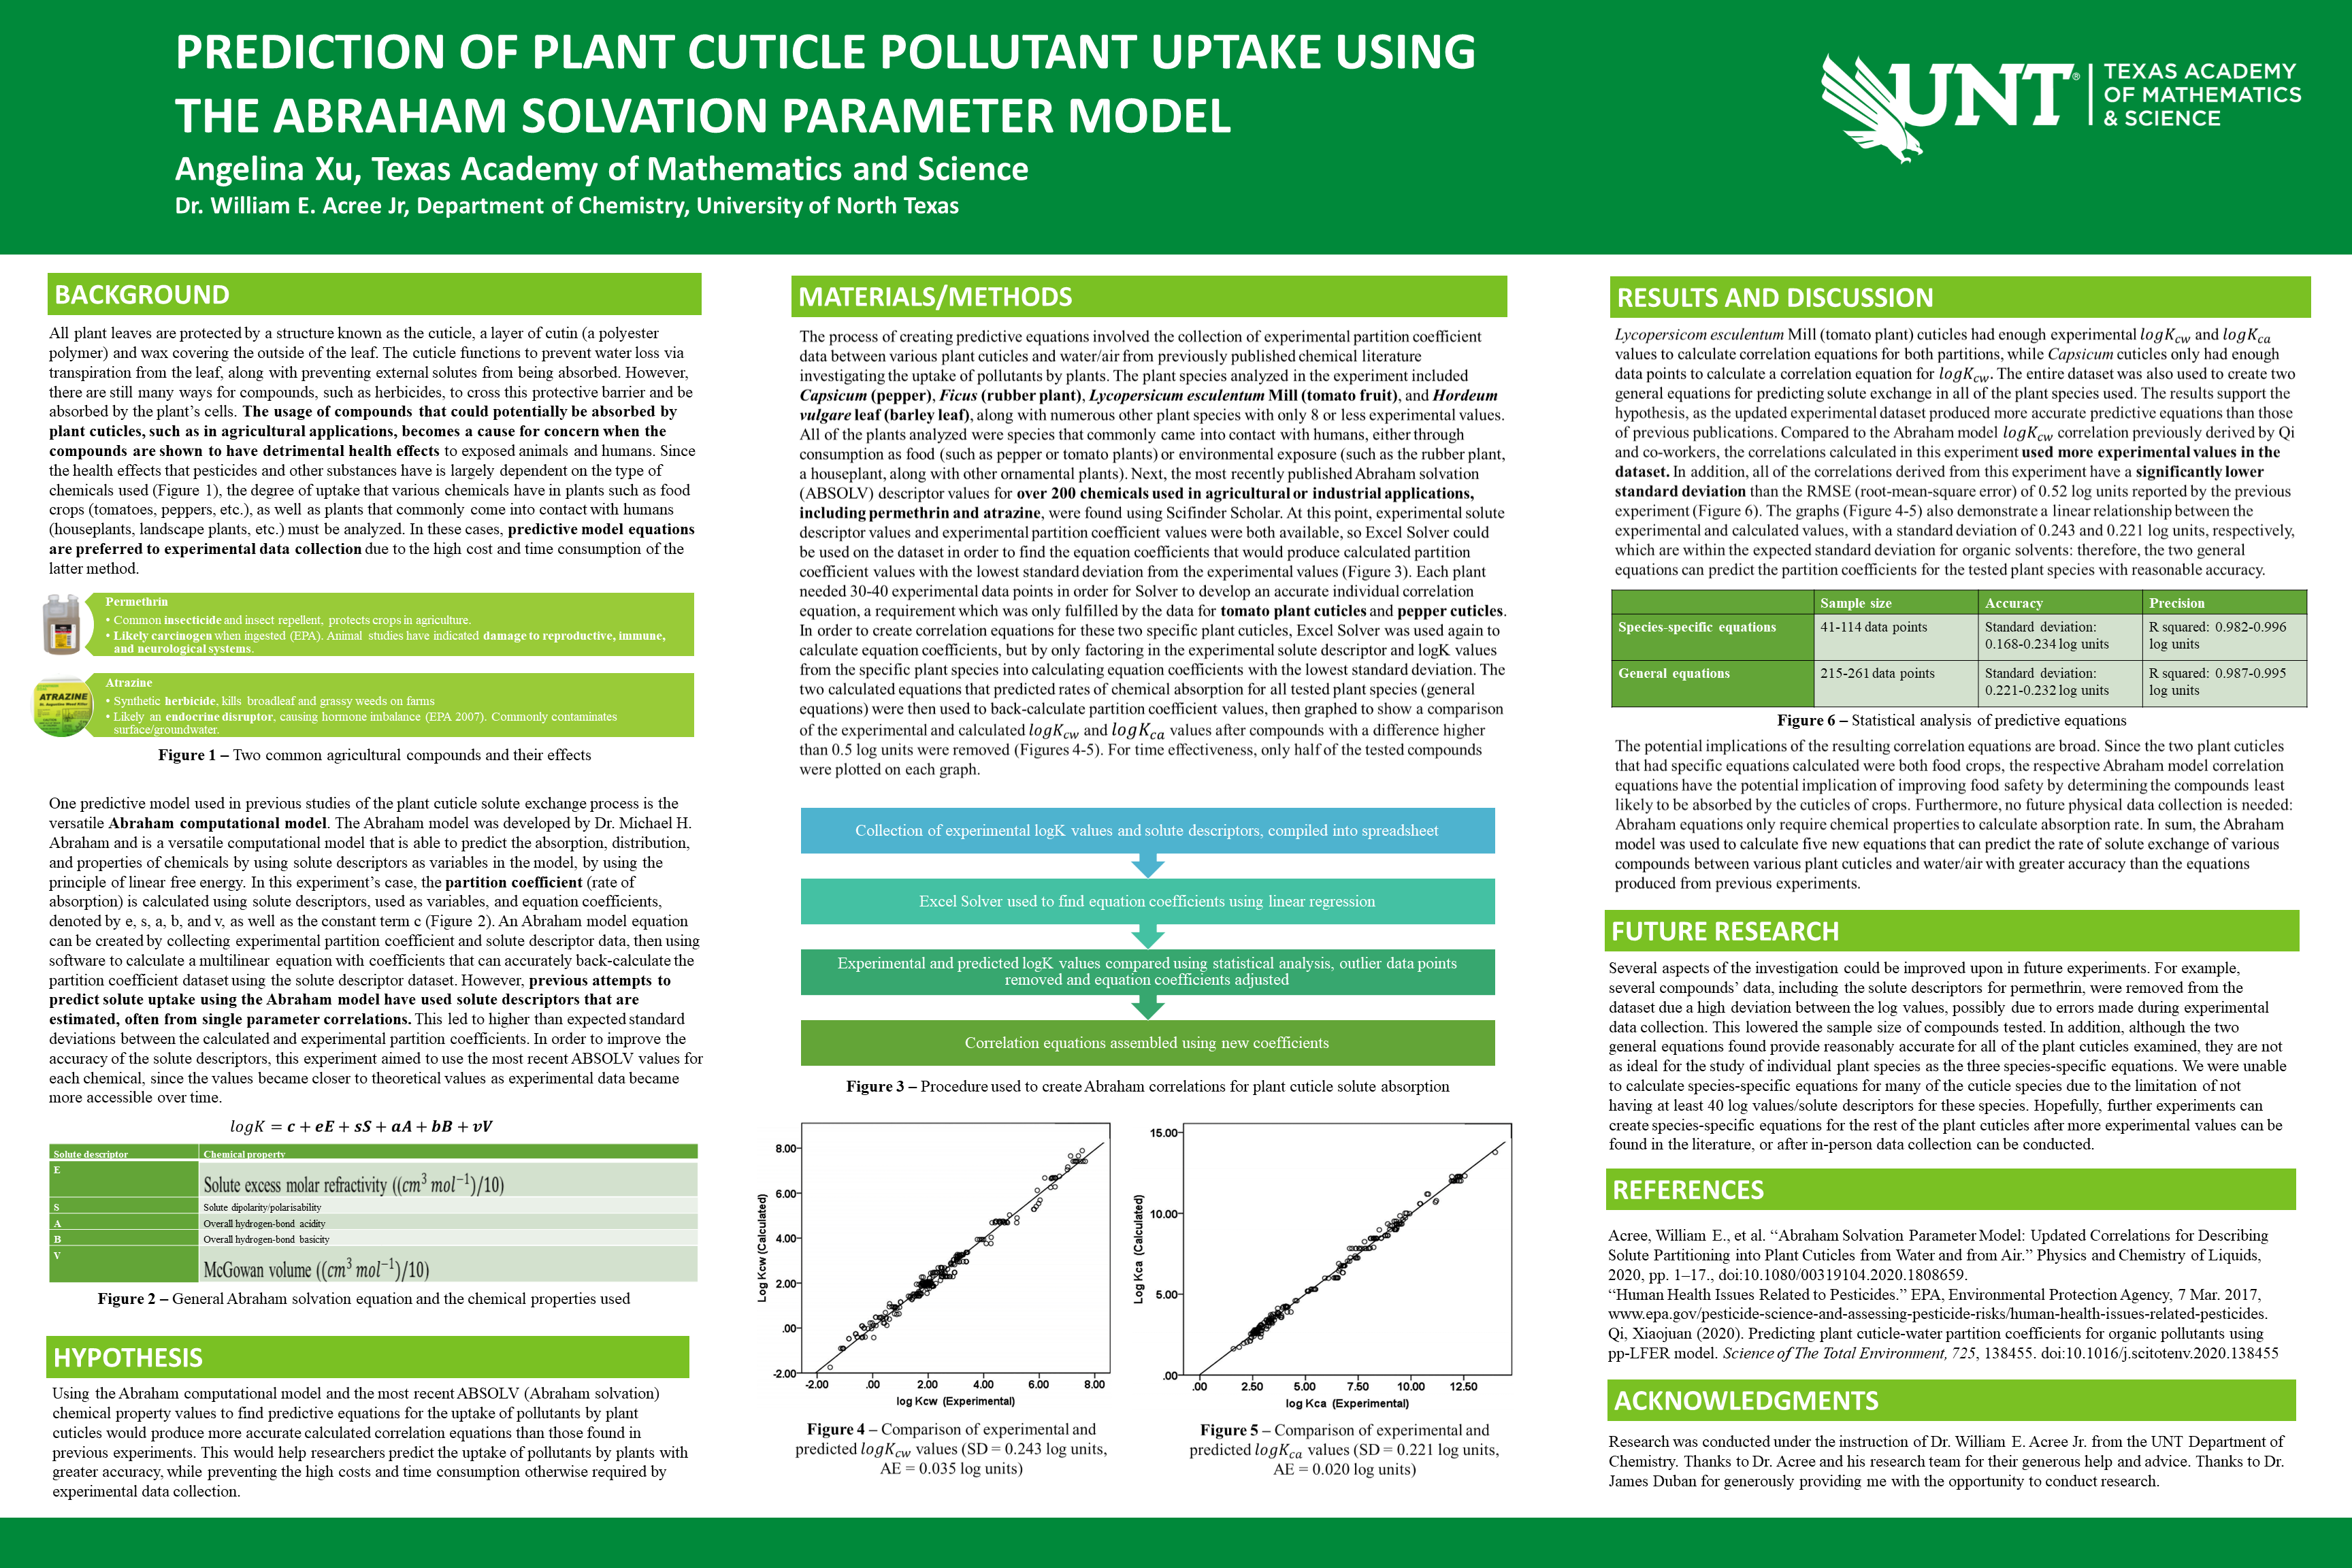 Prediction of Plant Cuticle Pollutant Uptake Using the Abraham Model